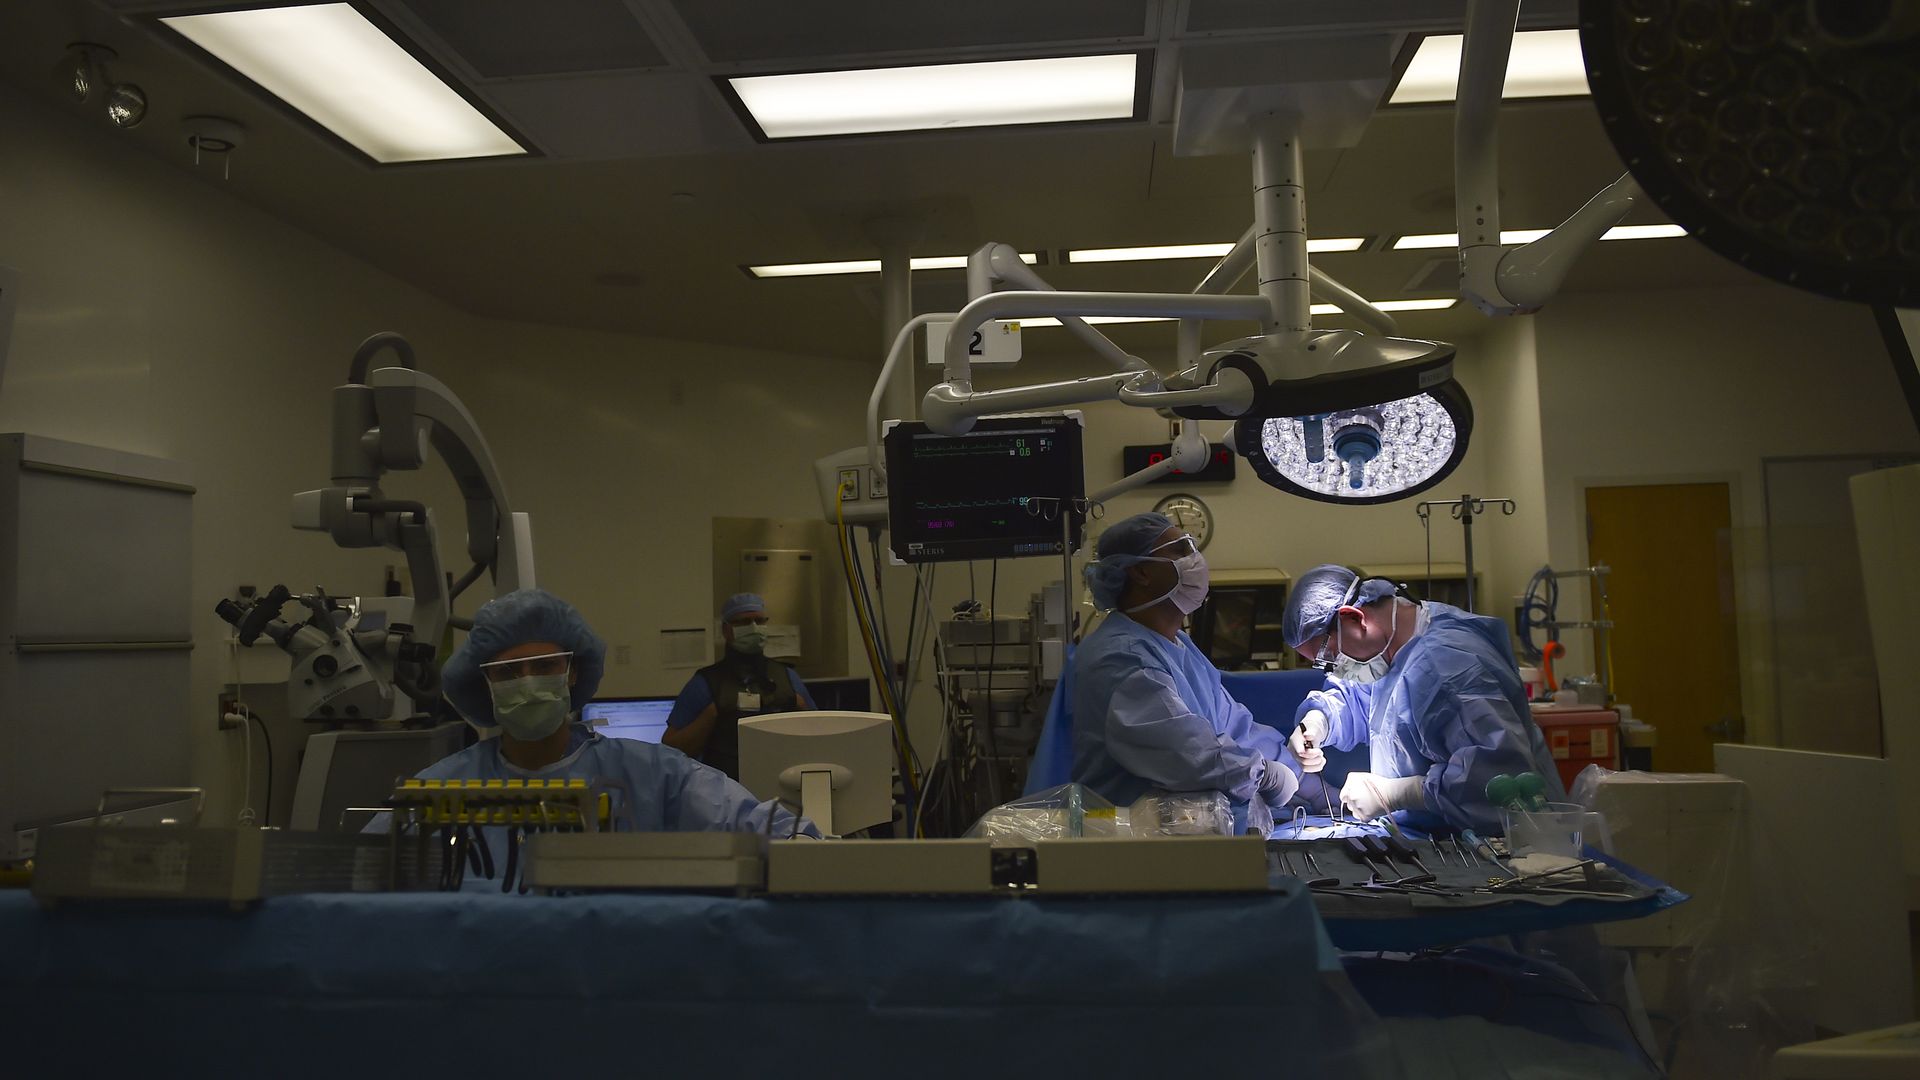 Surgeons work in a dimly lit operating room.